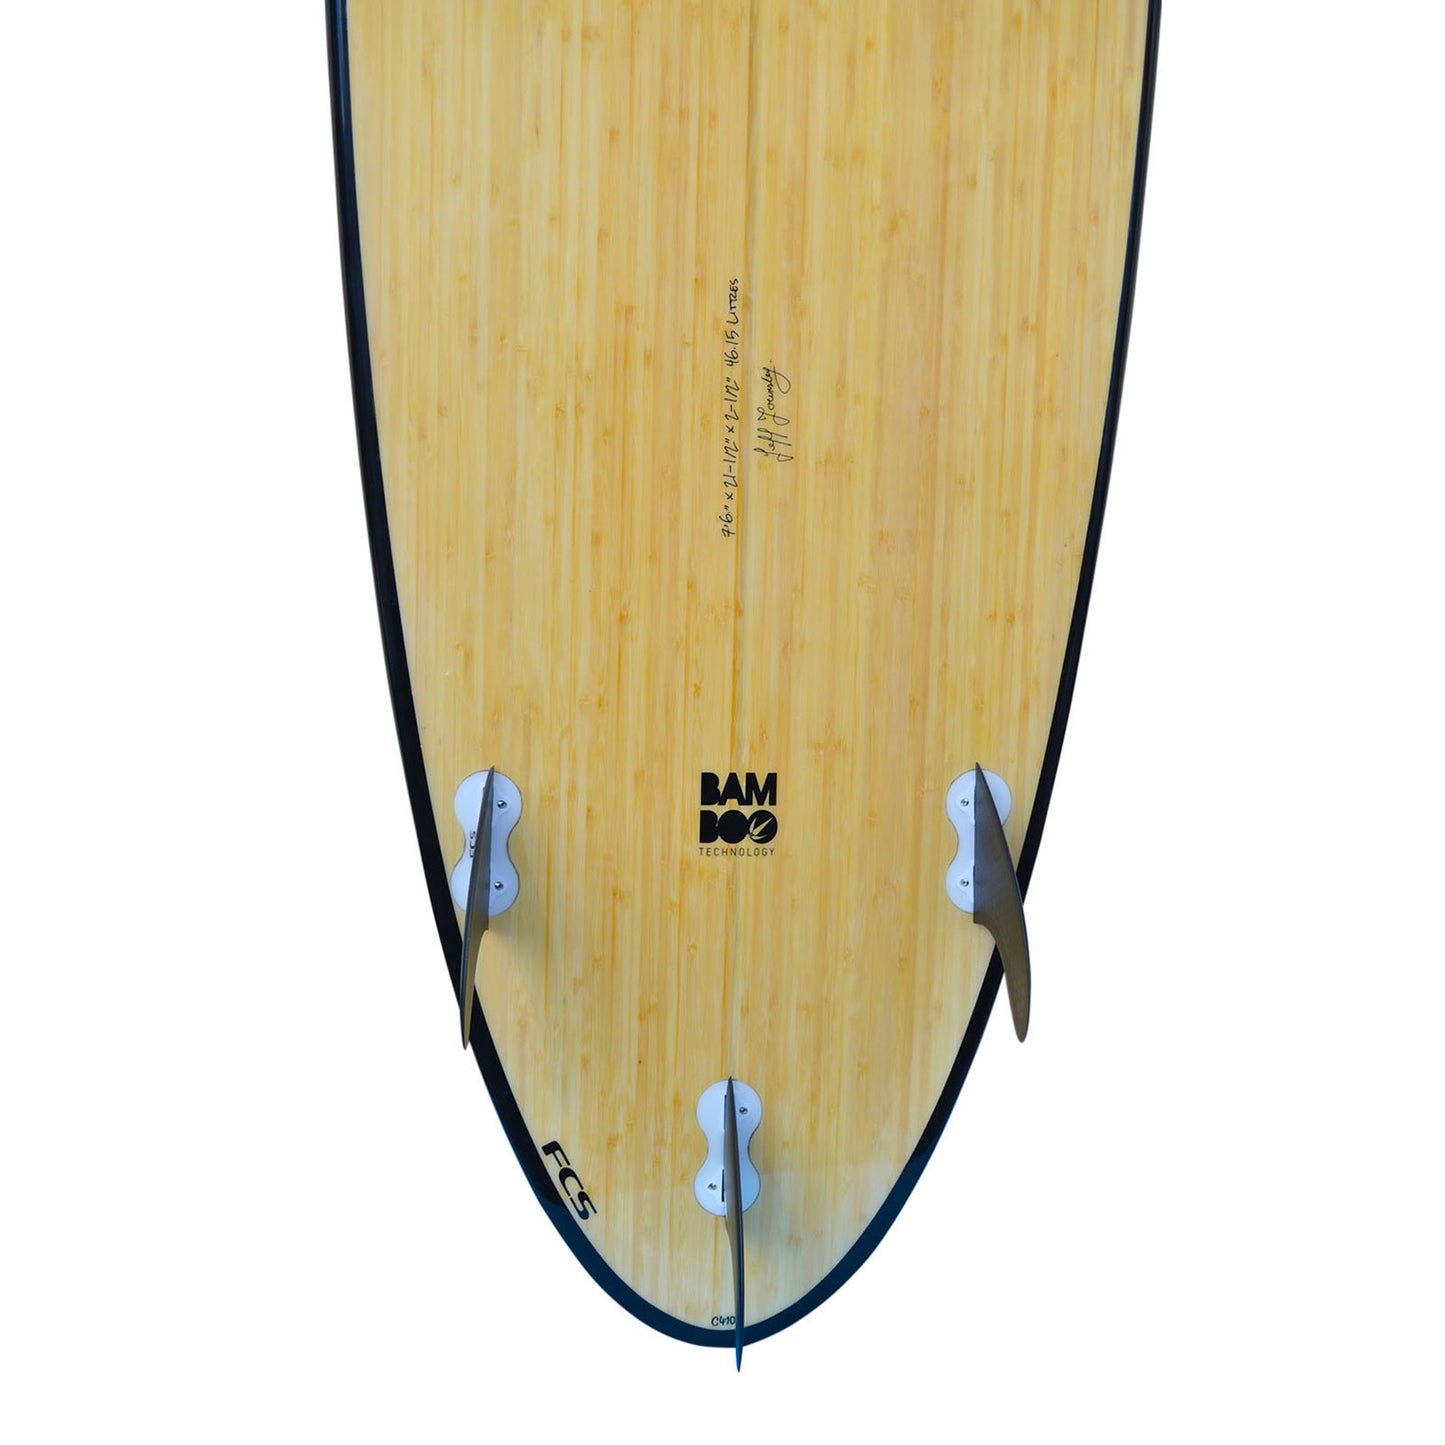 7′ 6″ Bamboo Round Tail Mini Mal Surfboard Package – Includes Bag, Leash, Fins & Wax